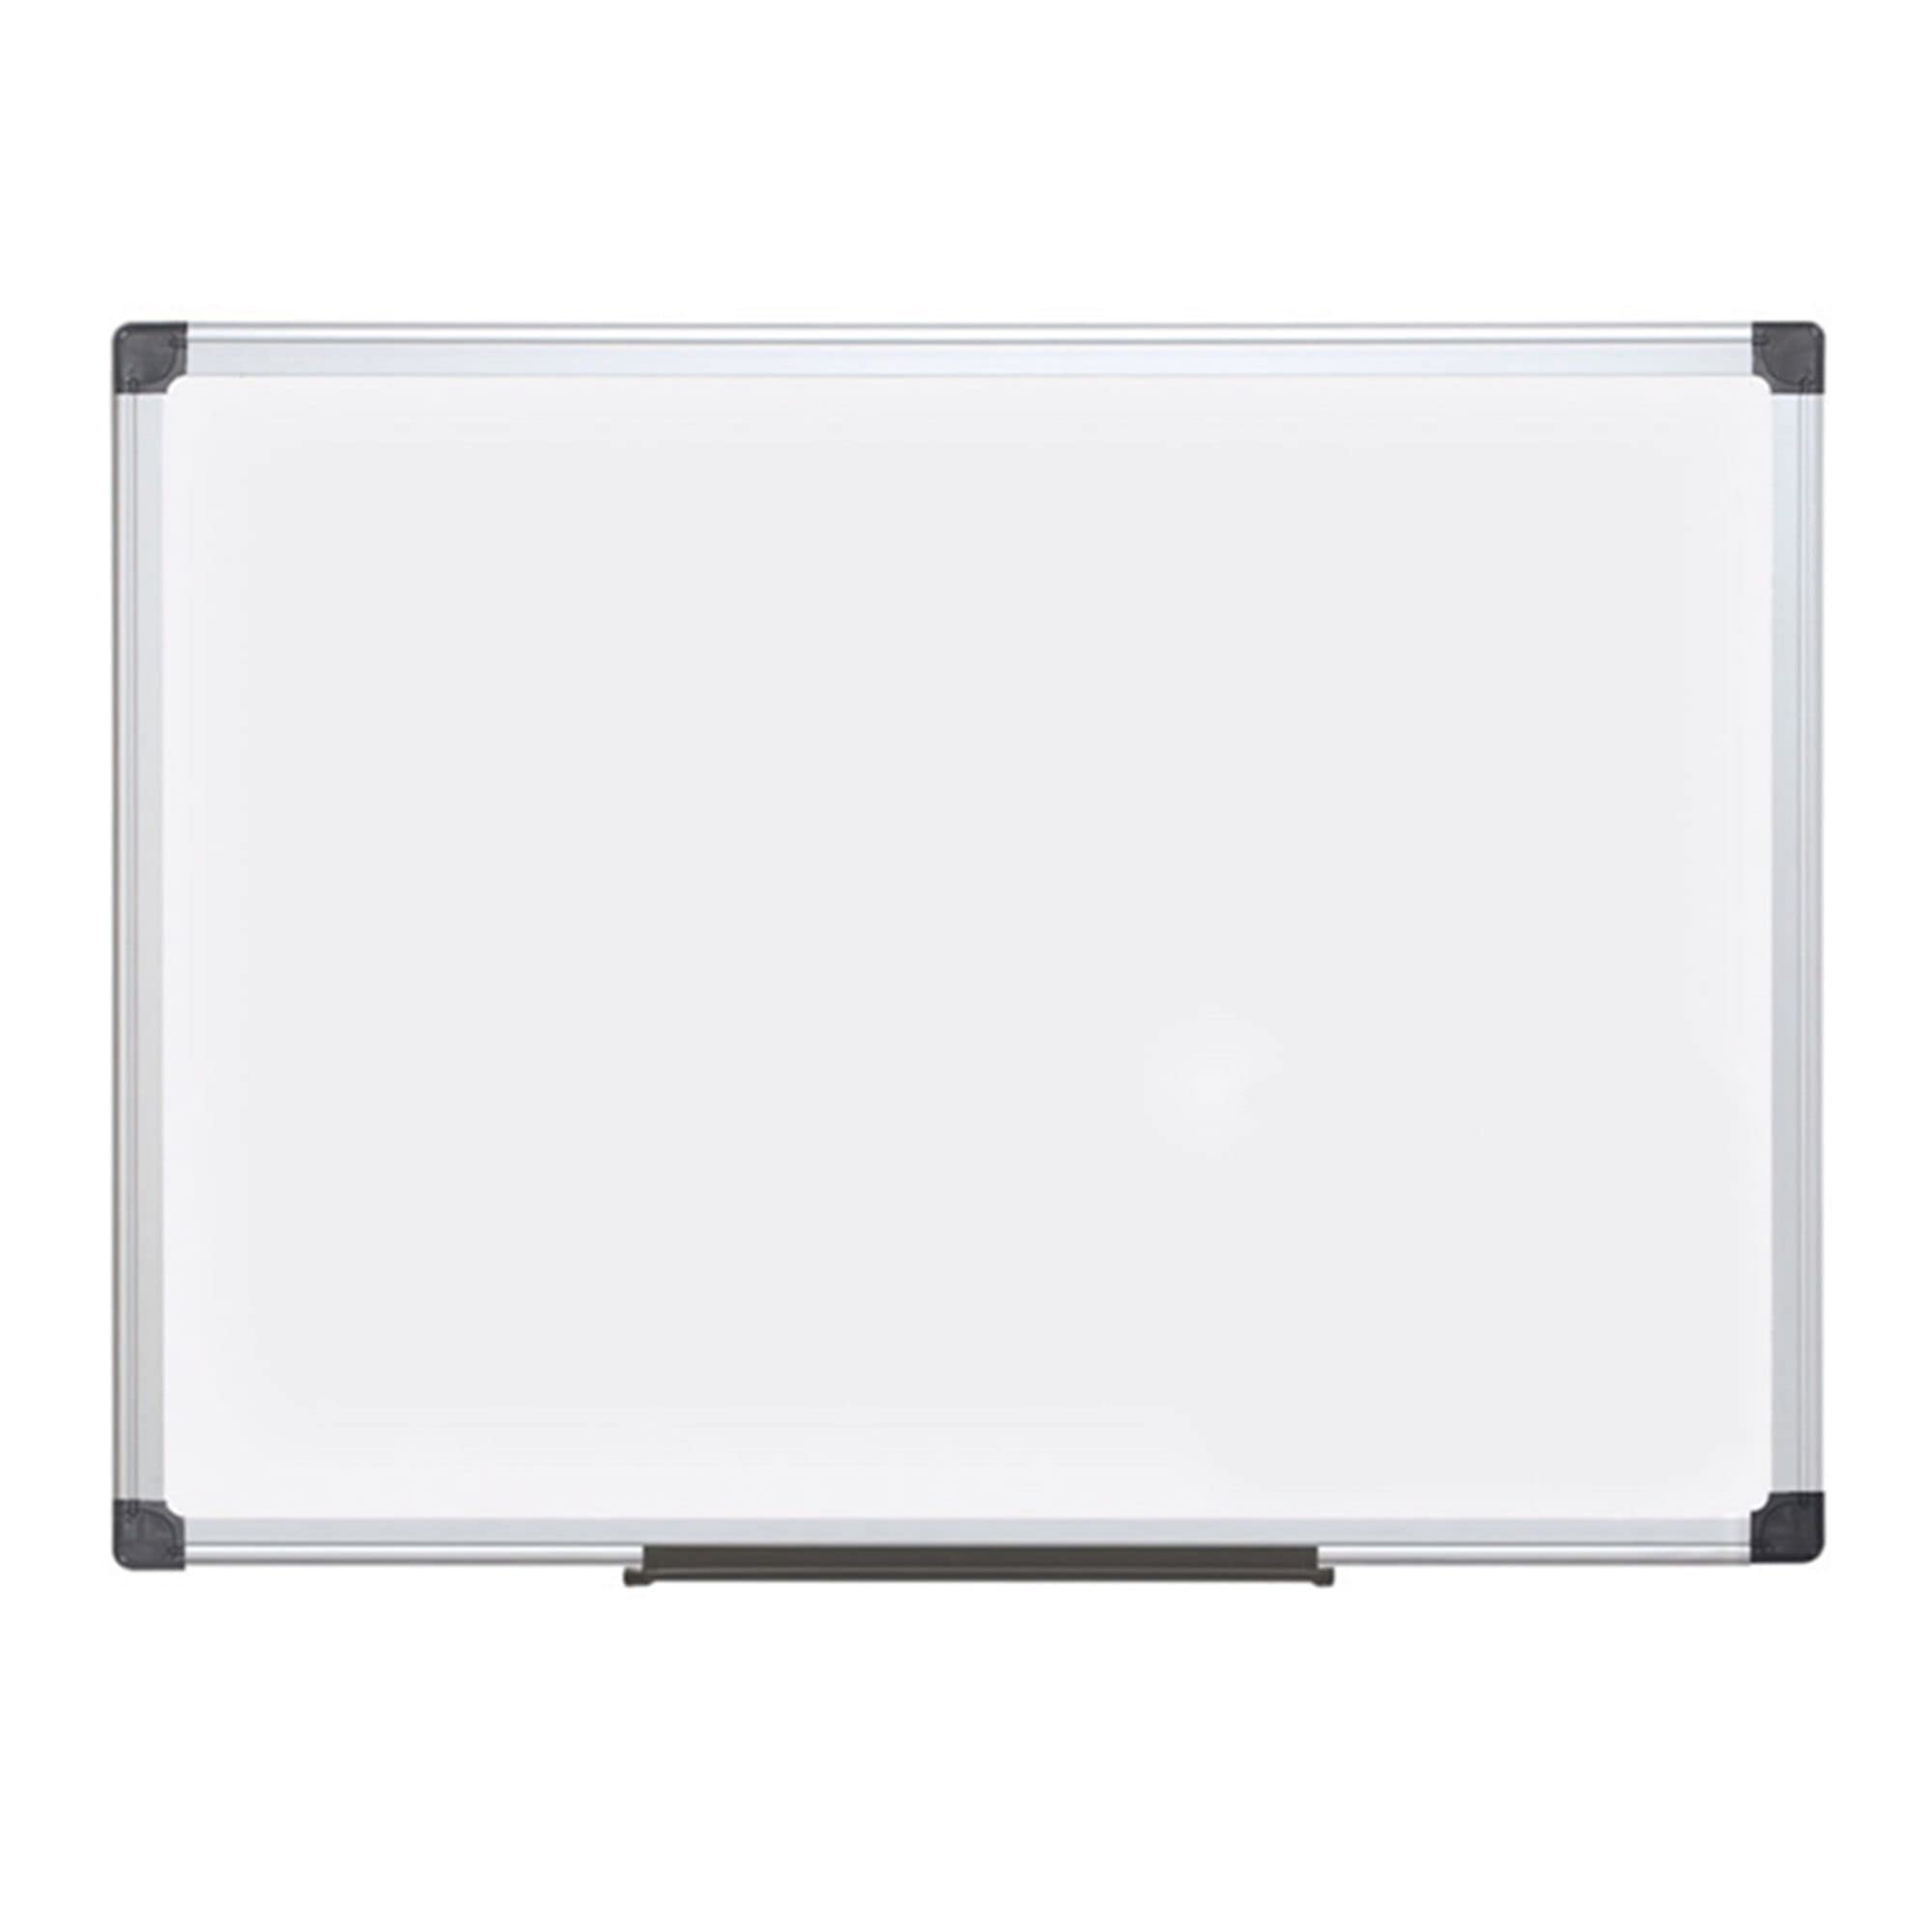 MasterVision 4 x 8 Feet Value Maya Magnetic Board, Lacqured Steel (MA2107170), Silver